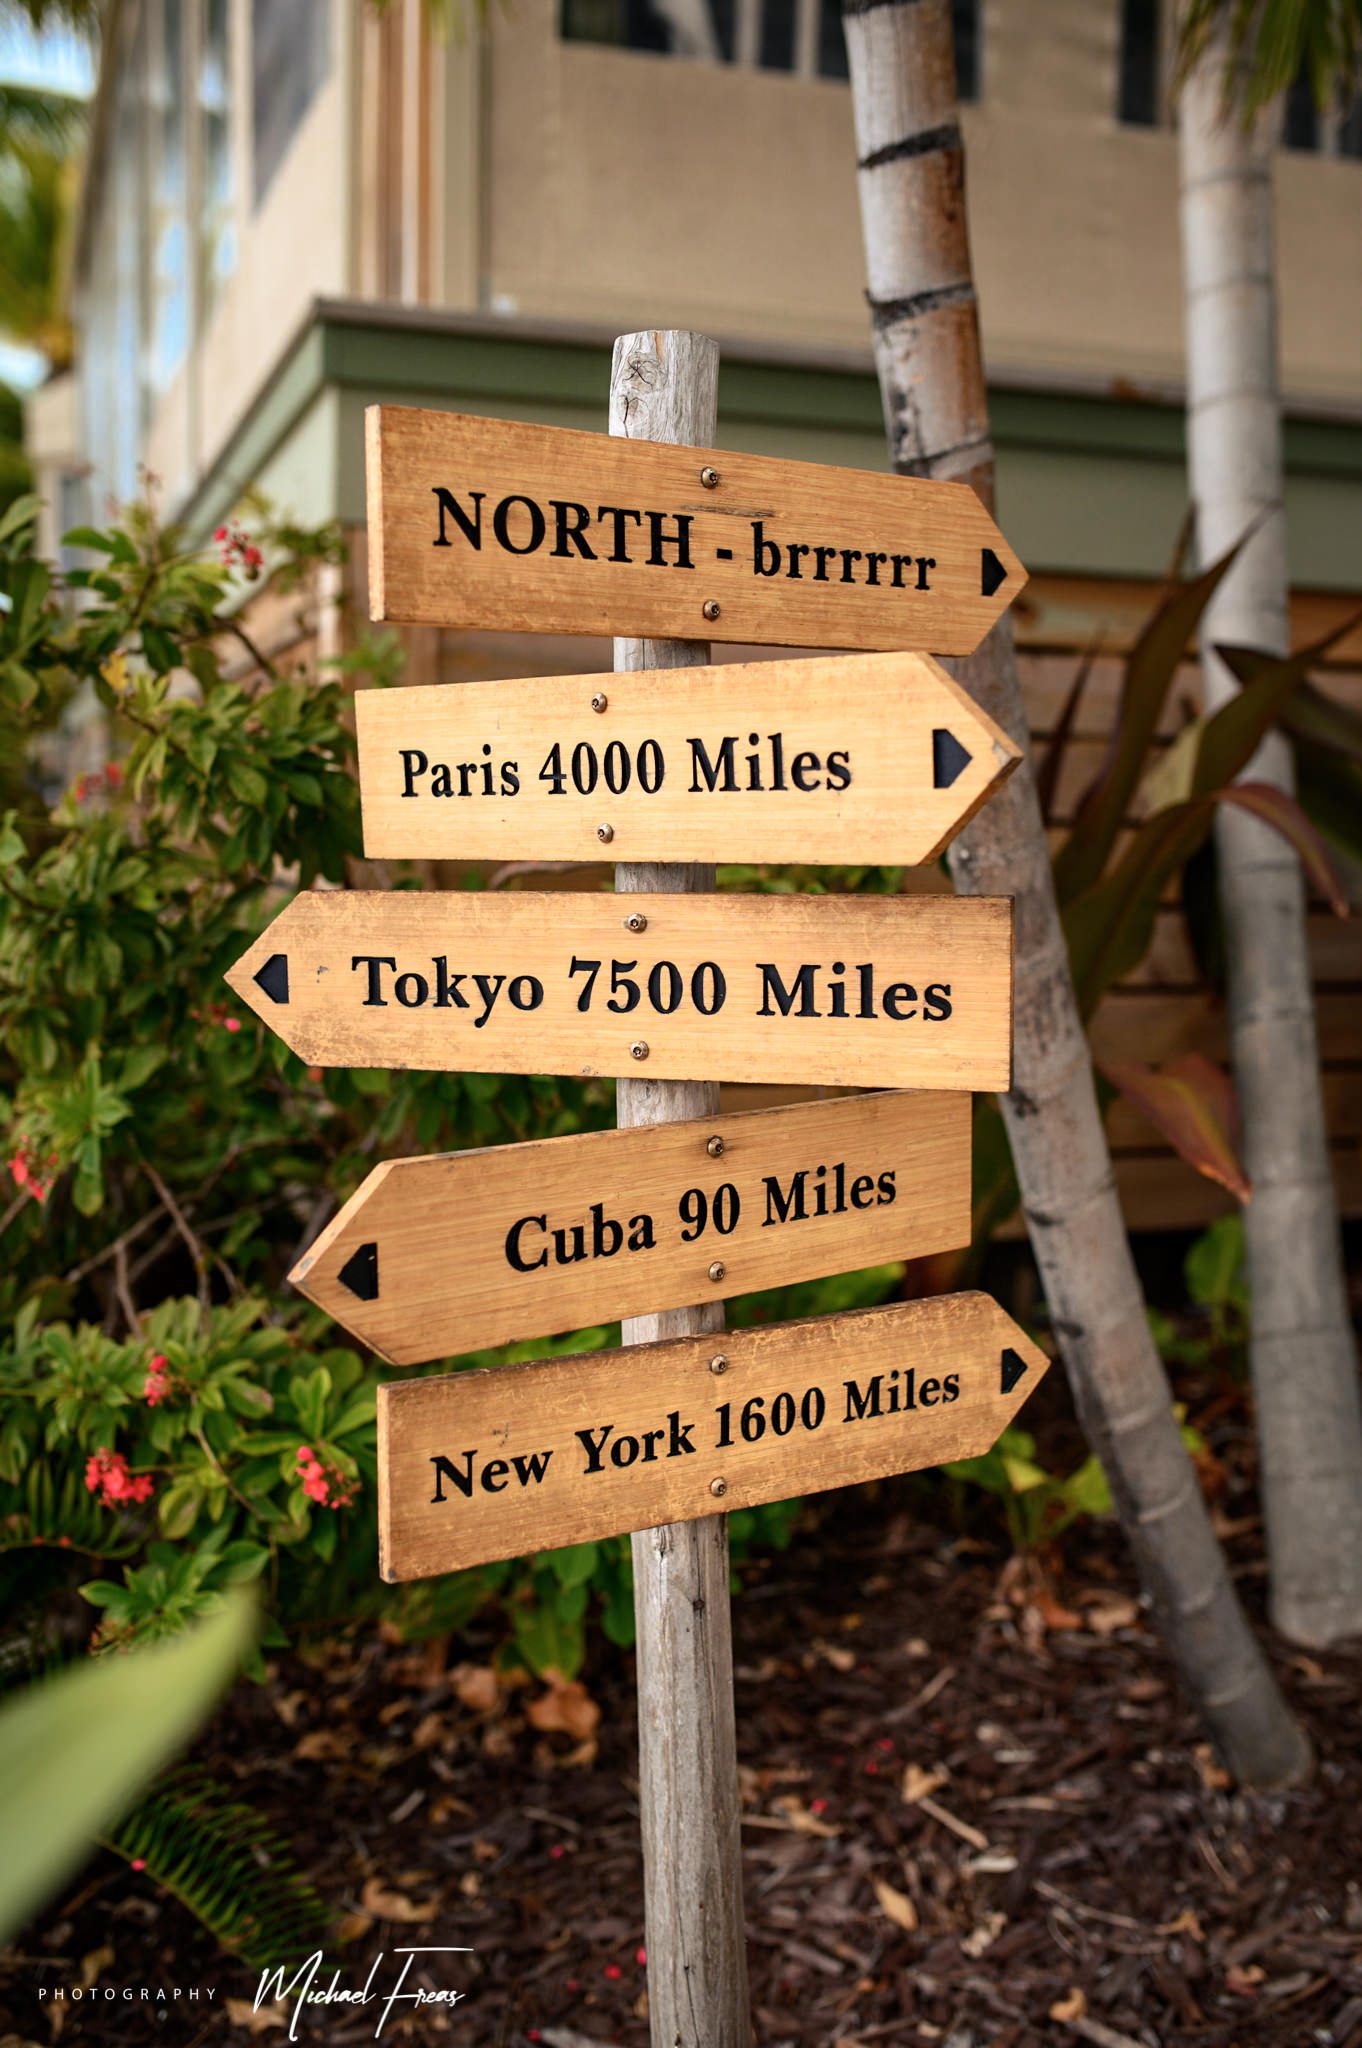 A wooden sign with arrows pointing in different directions, indicating Florida Keys destination.